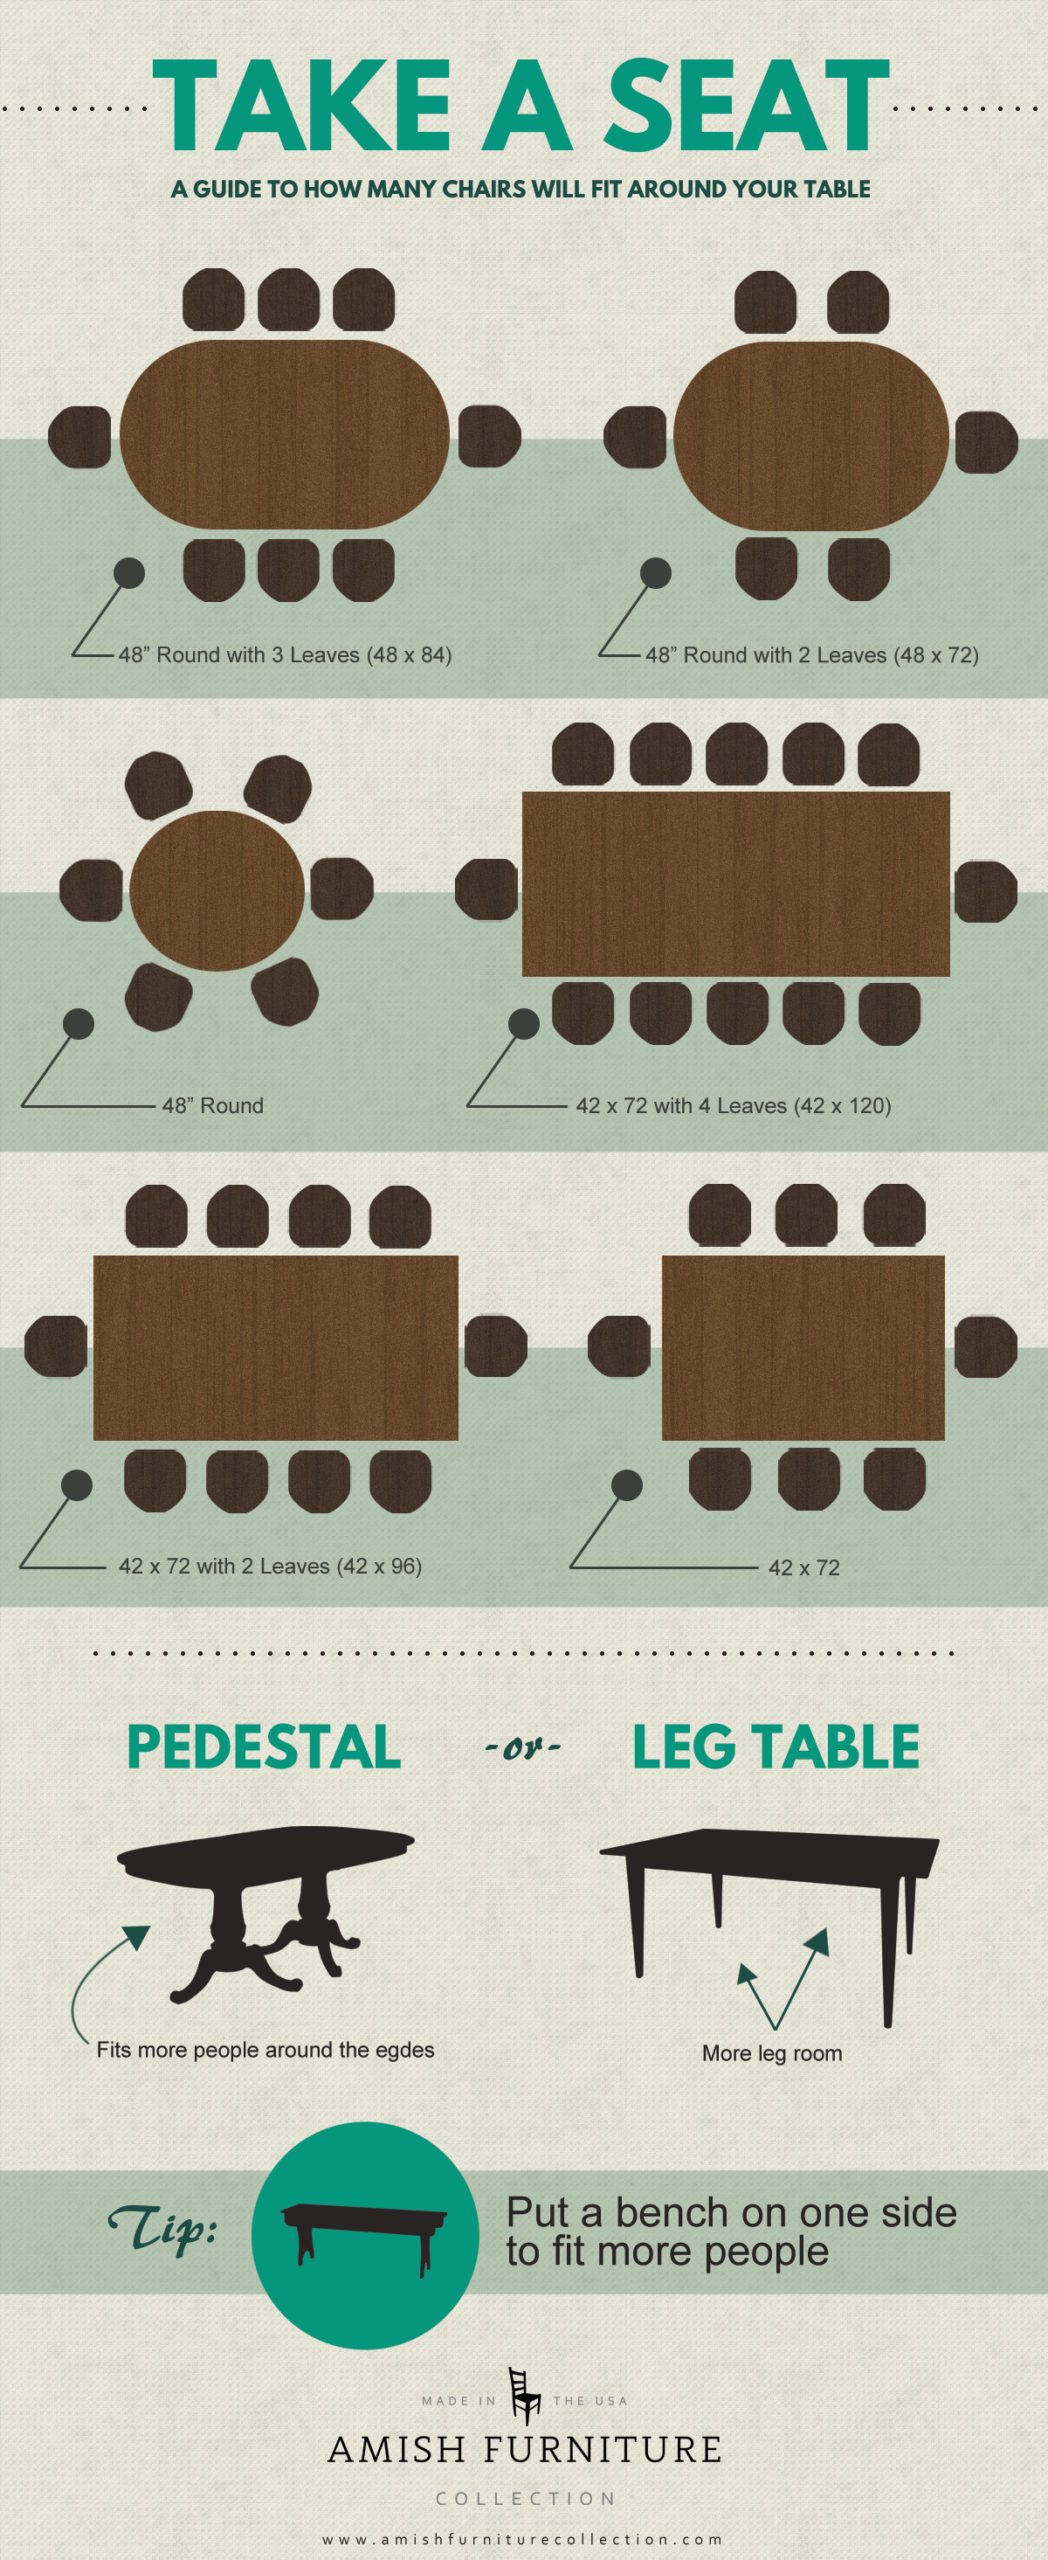 An infographic about how many chairs will fit around the table